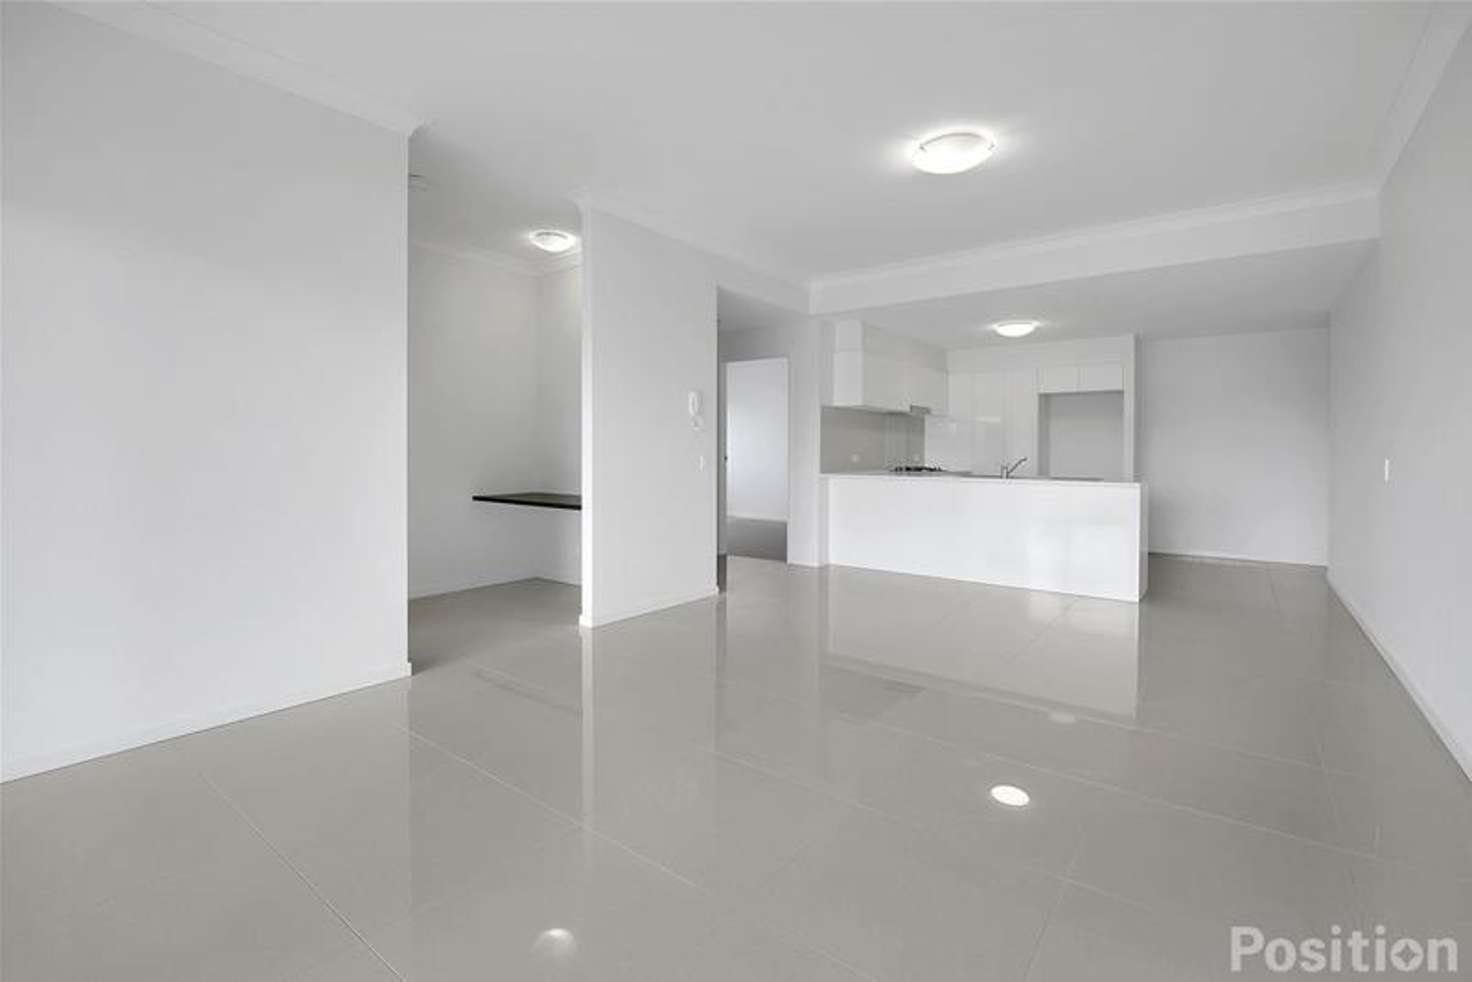 Main view of Homely apartment listing, 401/11 Playfield Street, Chermside QLD 4032